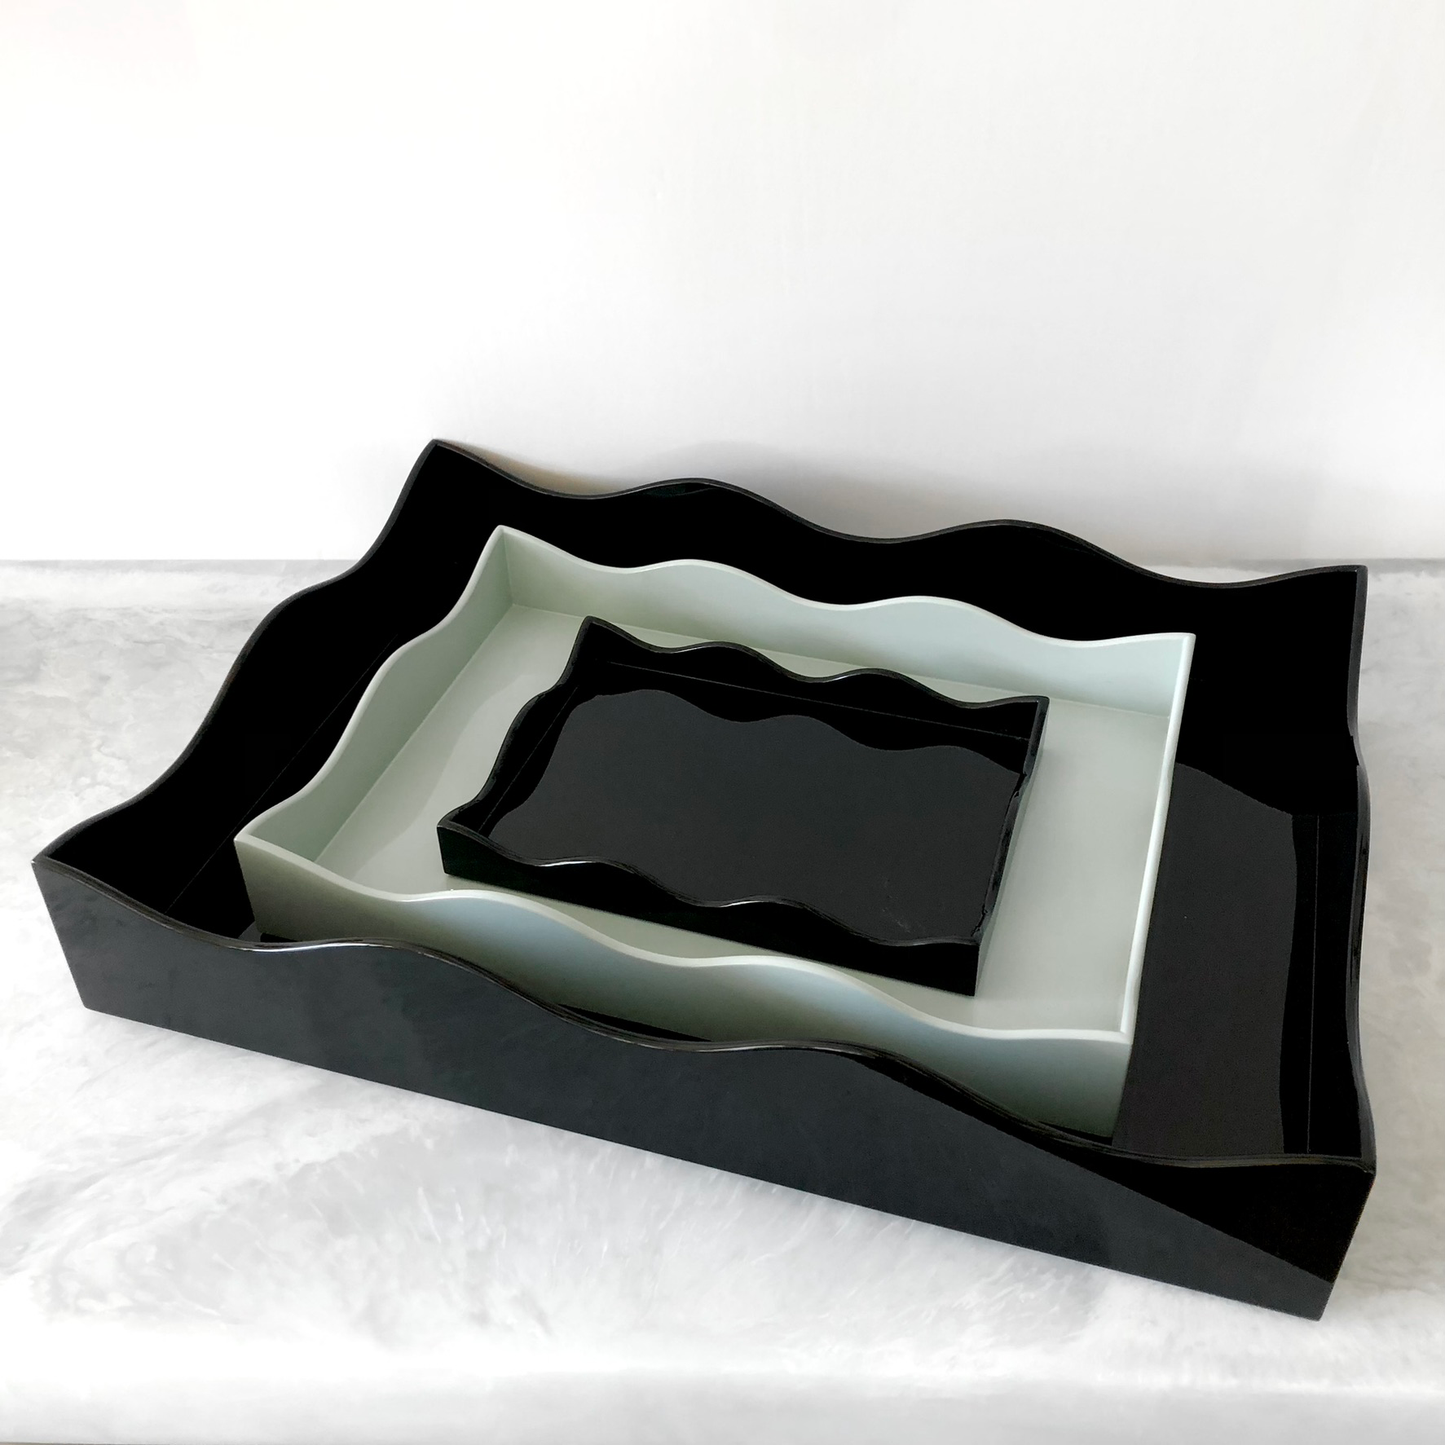 Large Belles Rives Lacquer Tray - Licorice Black